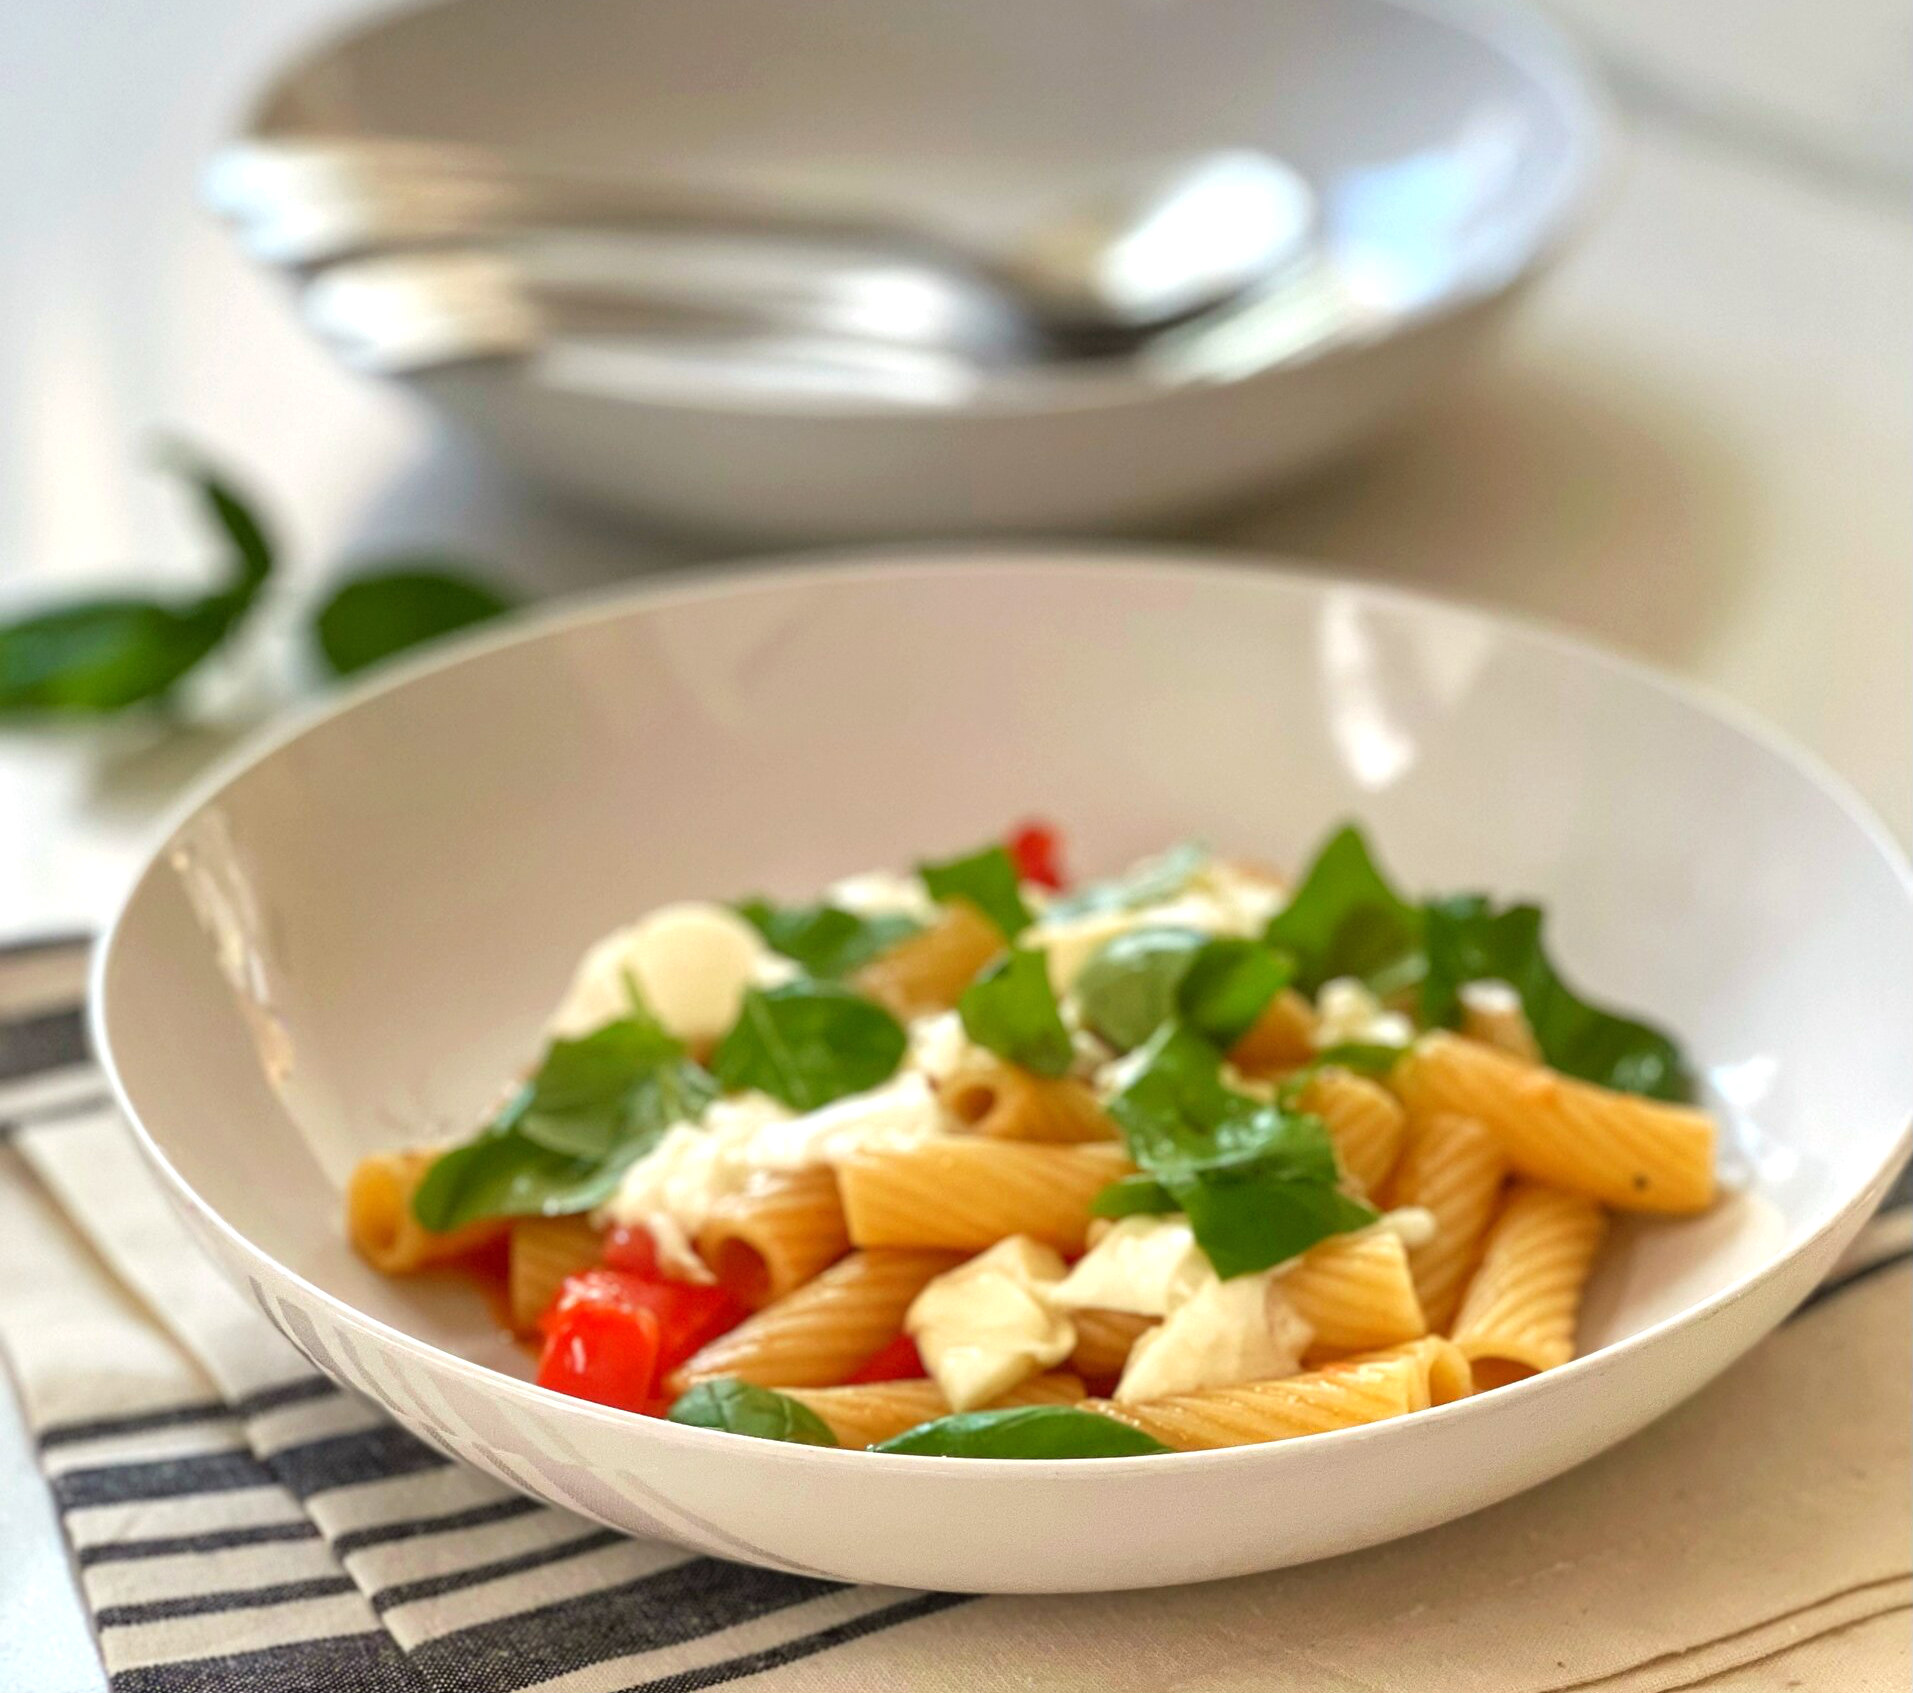 Burrata is an Italian cheese made from mozzarella and cream. The outside is a solid cheese, while the inside has a creamy filling. This recipe showcases fresh summer tomatoes, and their juices, for a natural sauce. Rigatoni Pasta, Creamy Burrata cheese and fresh basil makes a delightful light pasta dish.